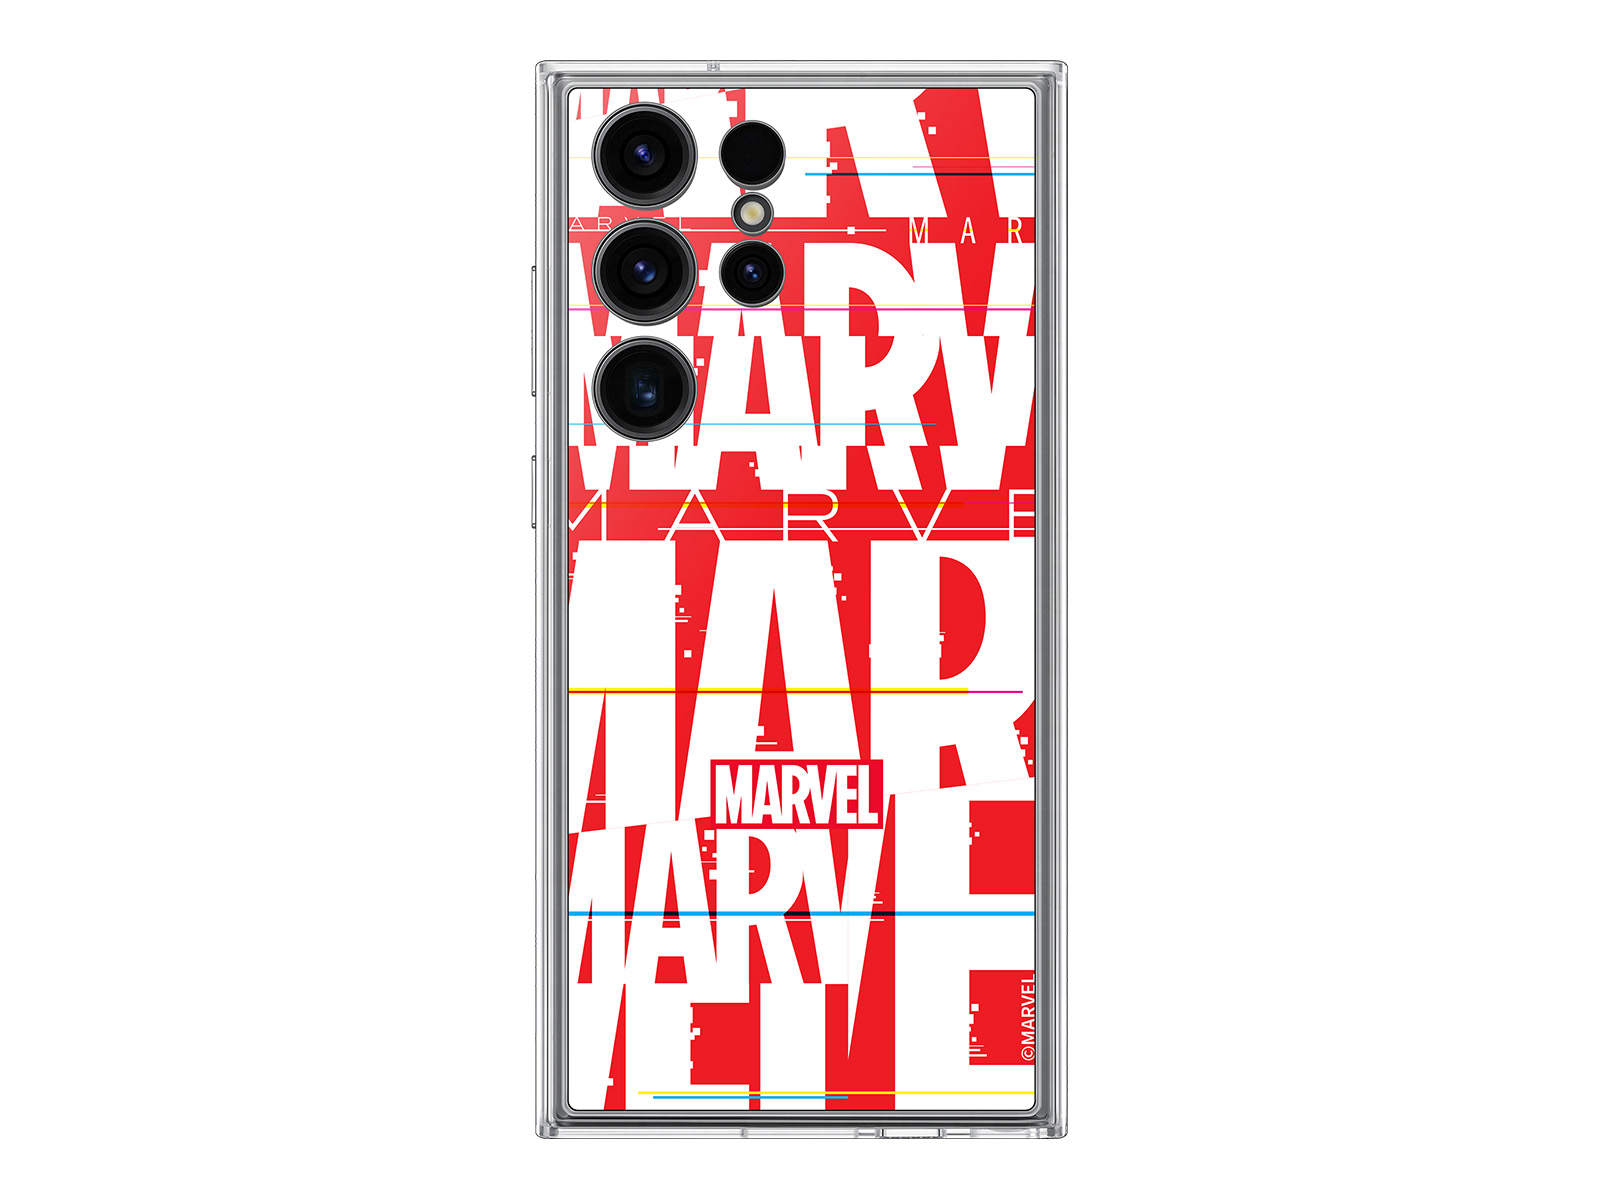 $100 bundle. What are your thoughts? : r/MarvelSnap